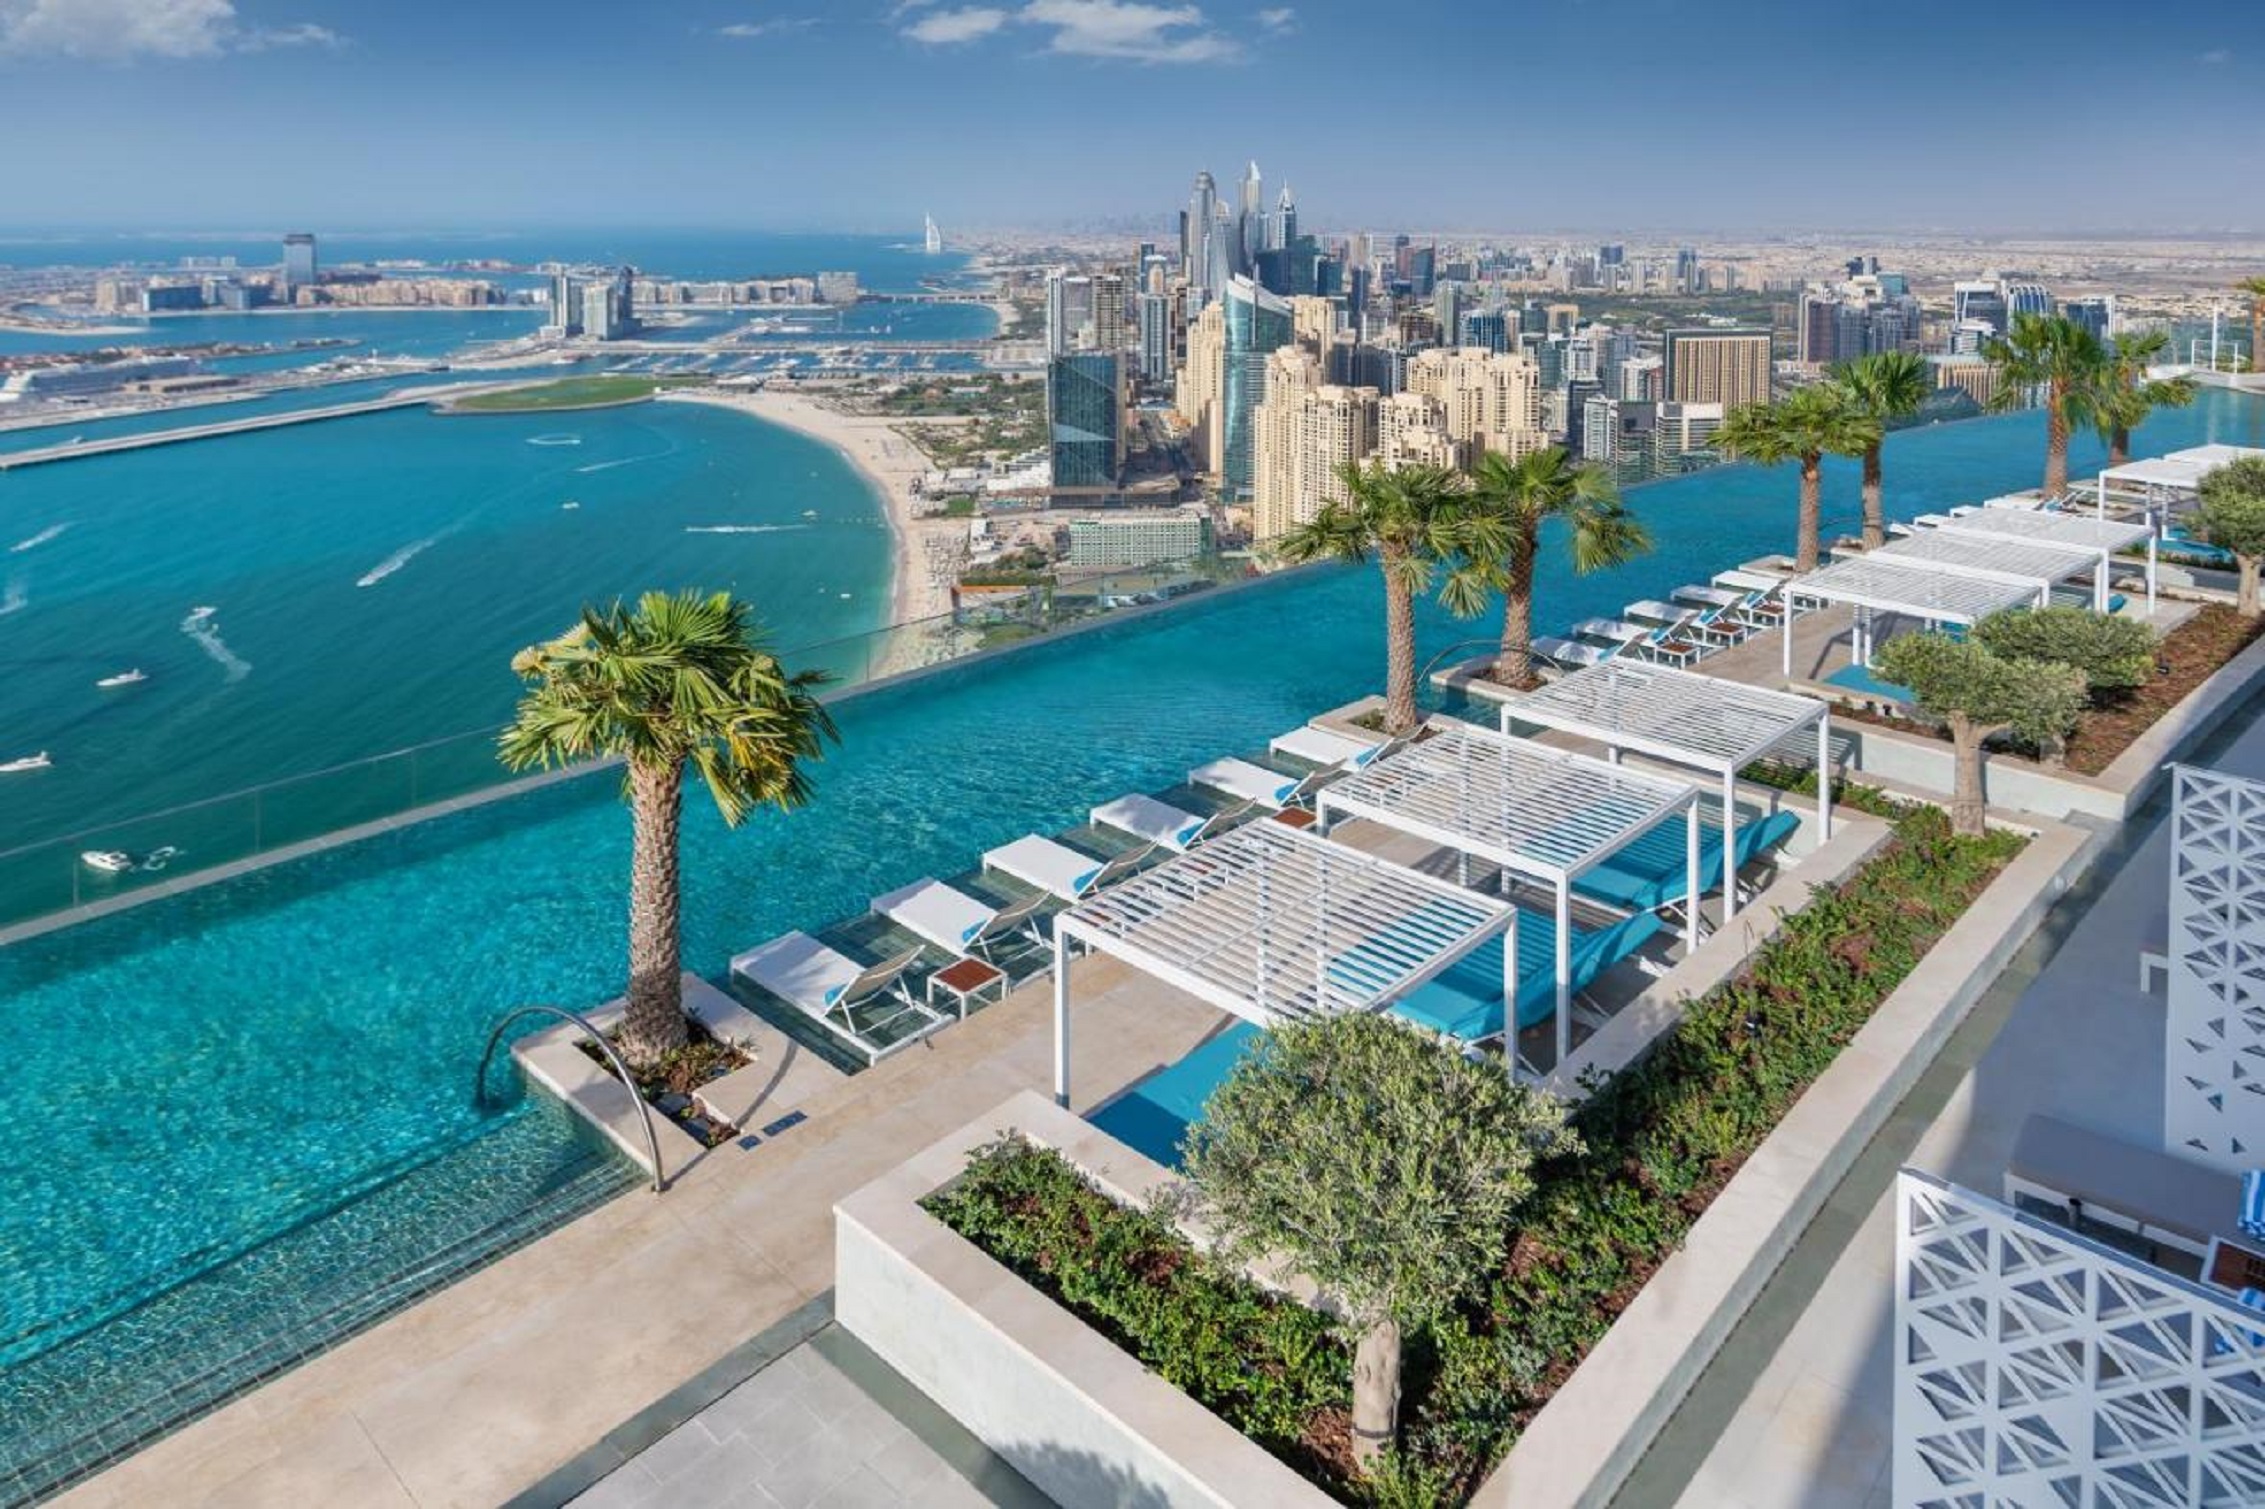 Infinity Pool at Address Beach Resort Dubai - One of the top incredible Infinity Pools in the world with best views